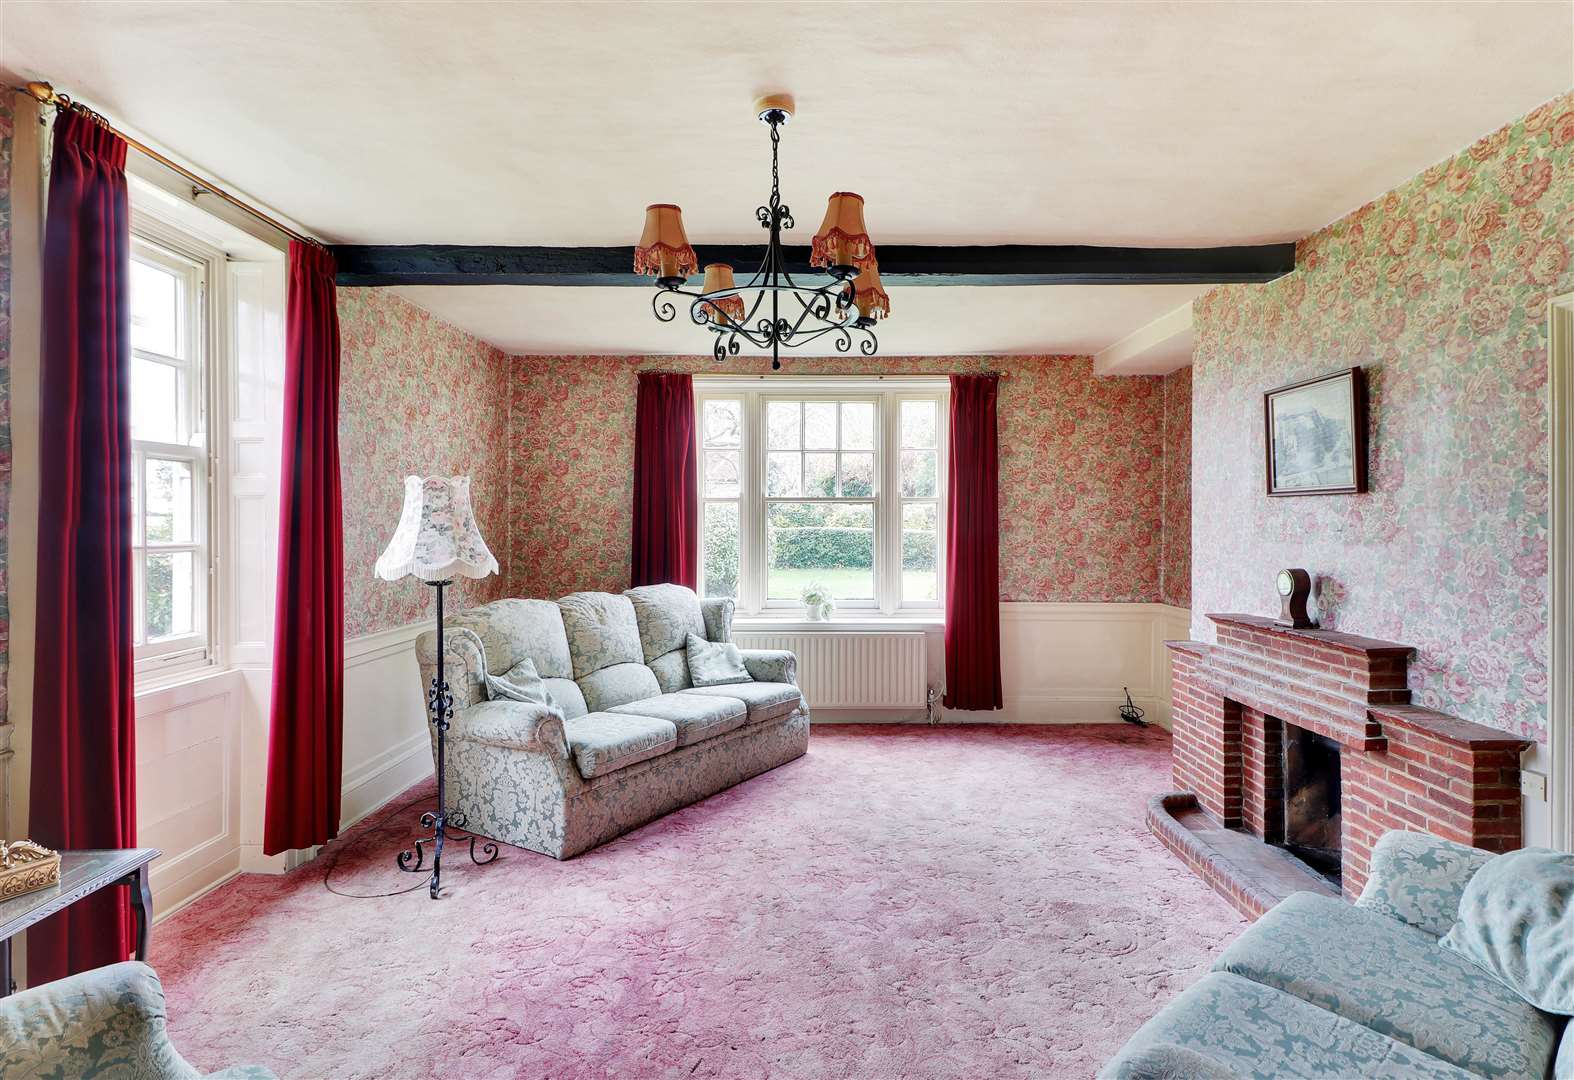 Inside one of the main rooms of the vintage property. Photo: BTF Partnership